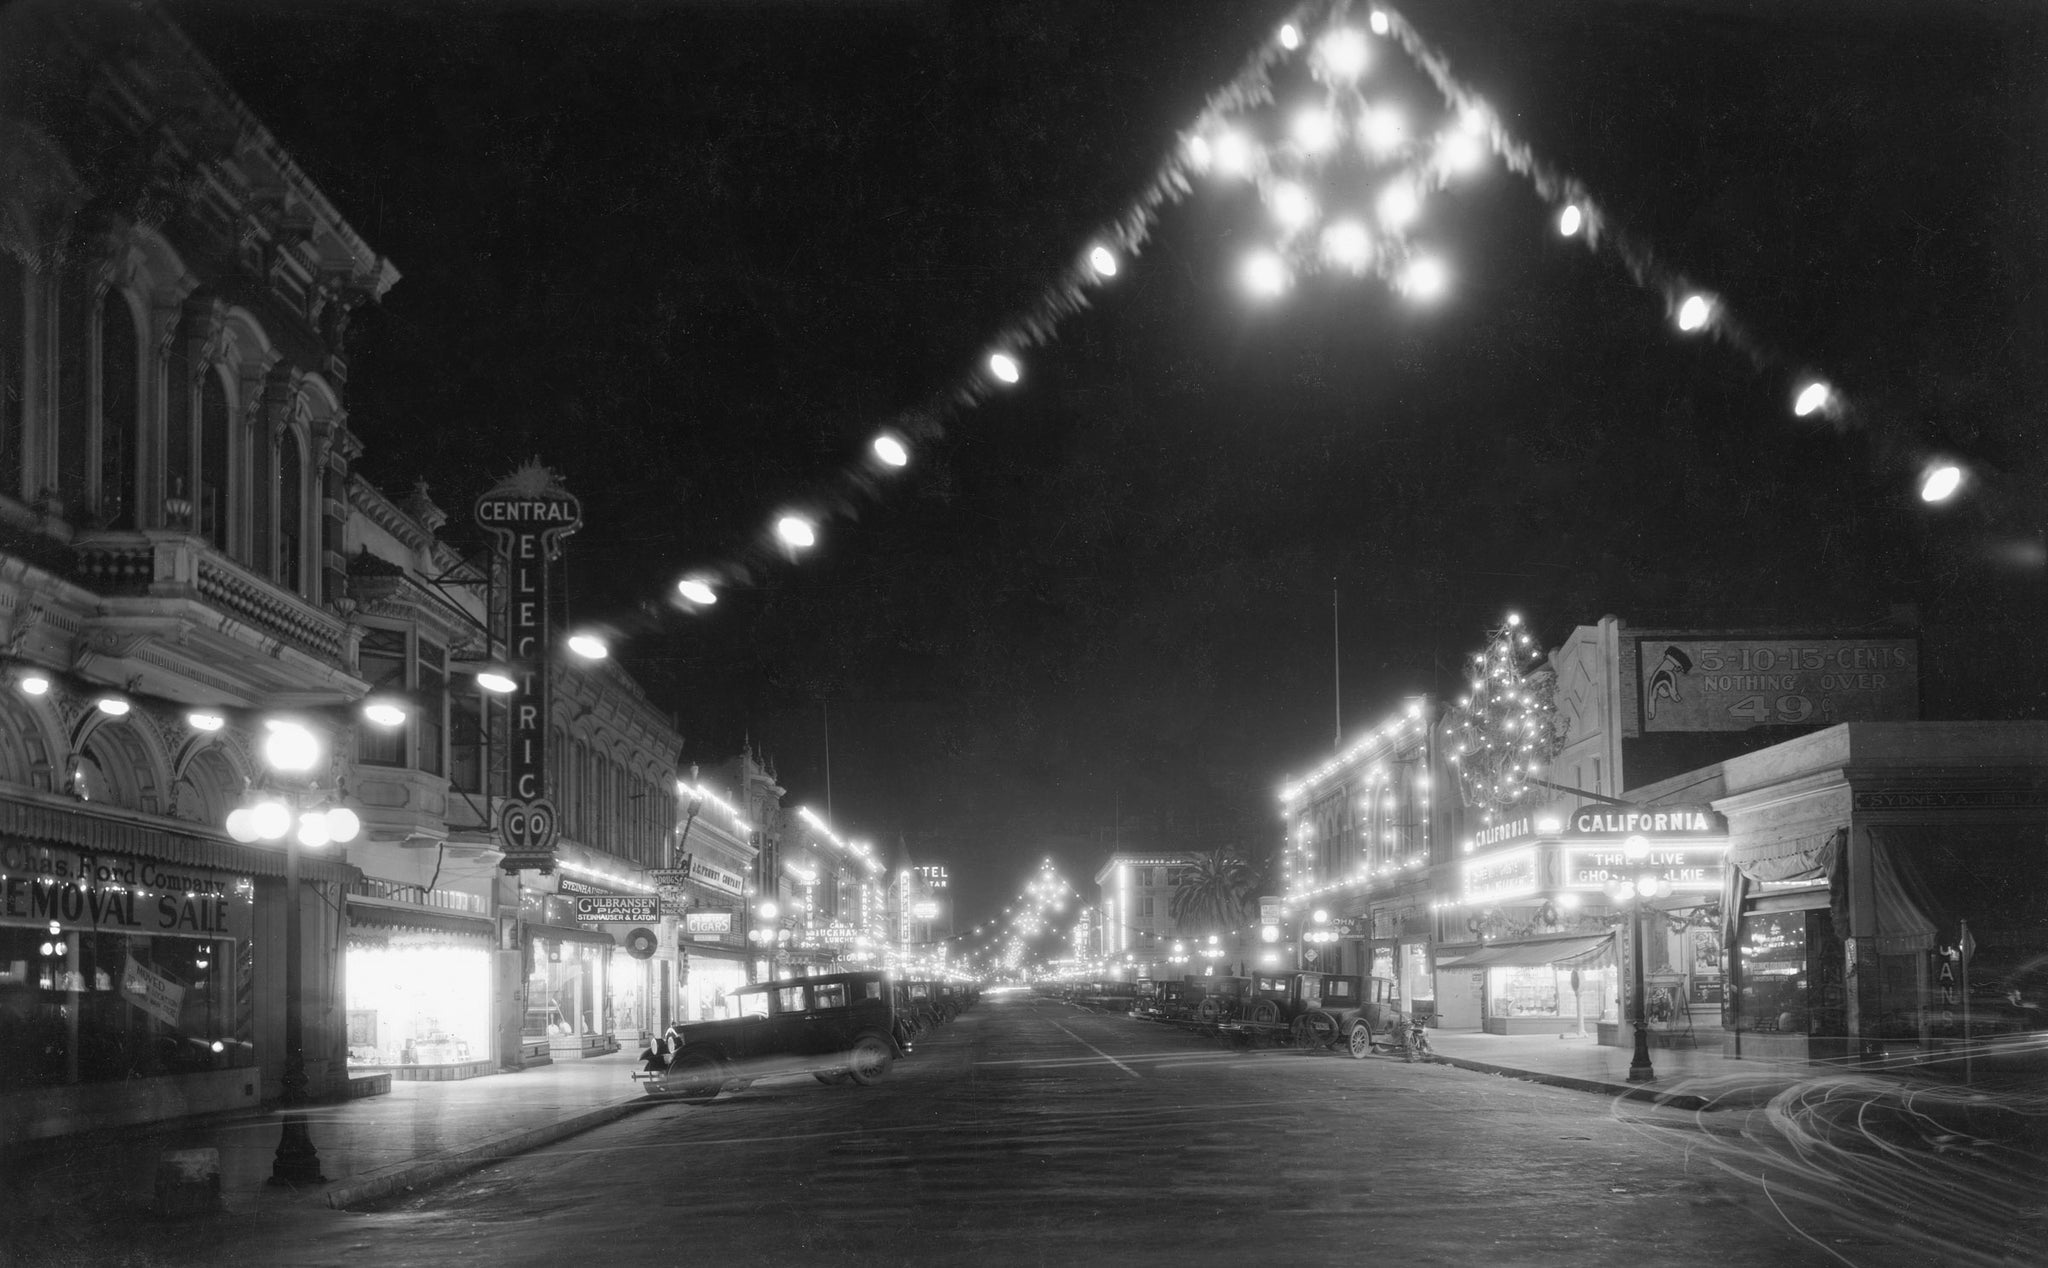 Holiday lighting along Main Street, Watsonville, 1920s. The Central Electric Company is on the left. -- CENTRAL ELECTRIC COMPANY